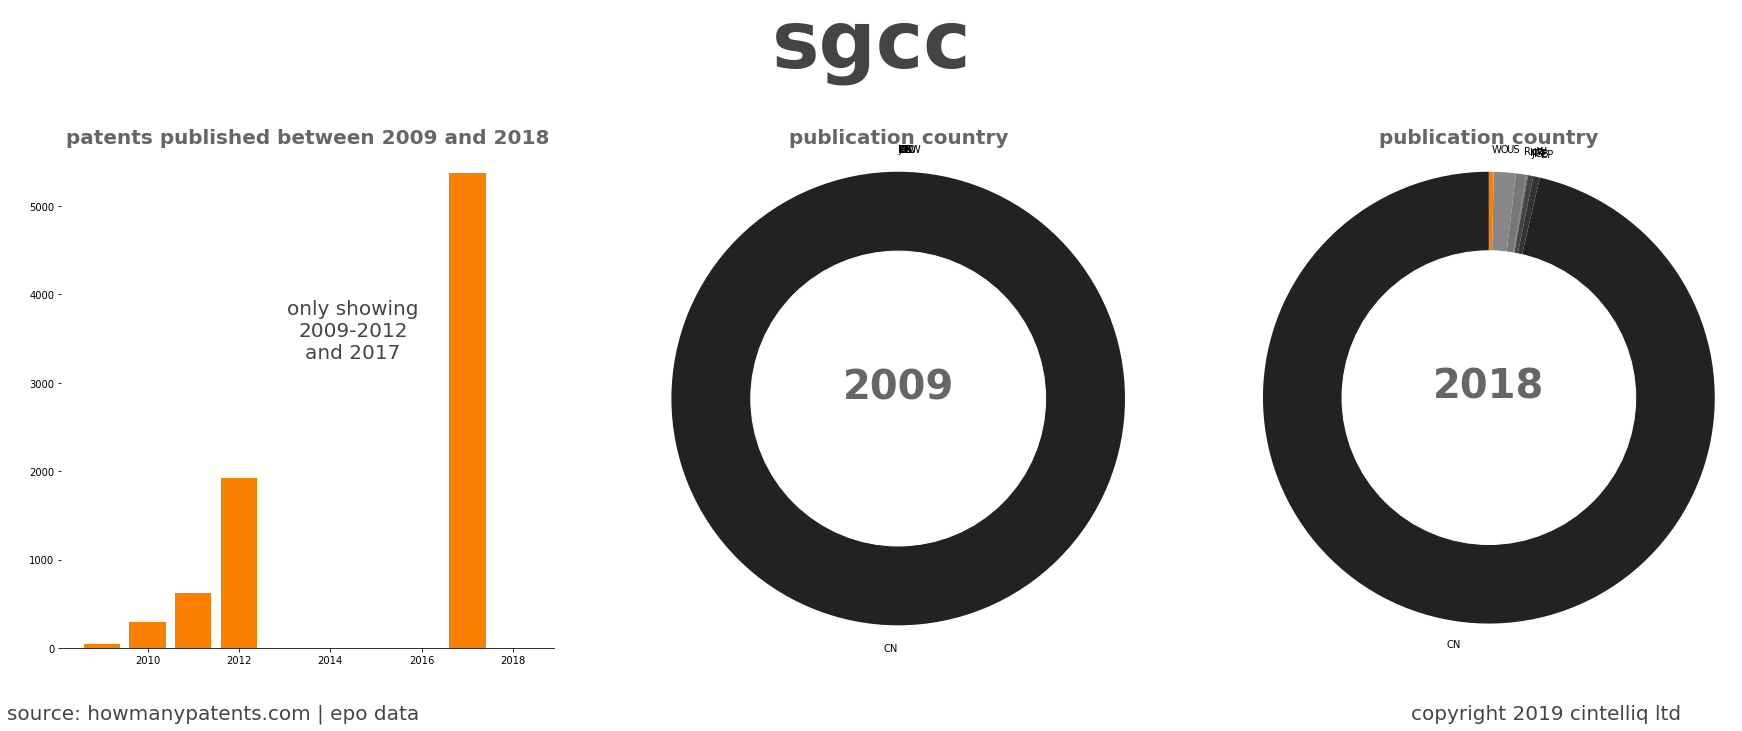 summary of patents for Sgcc